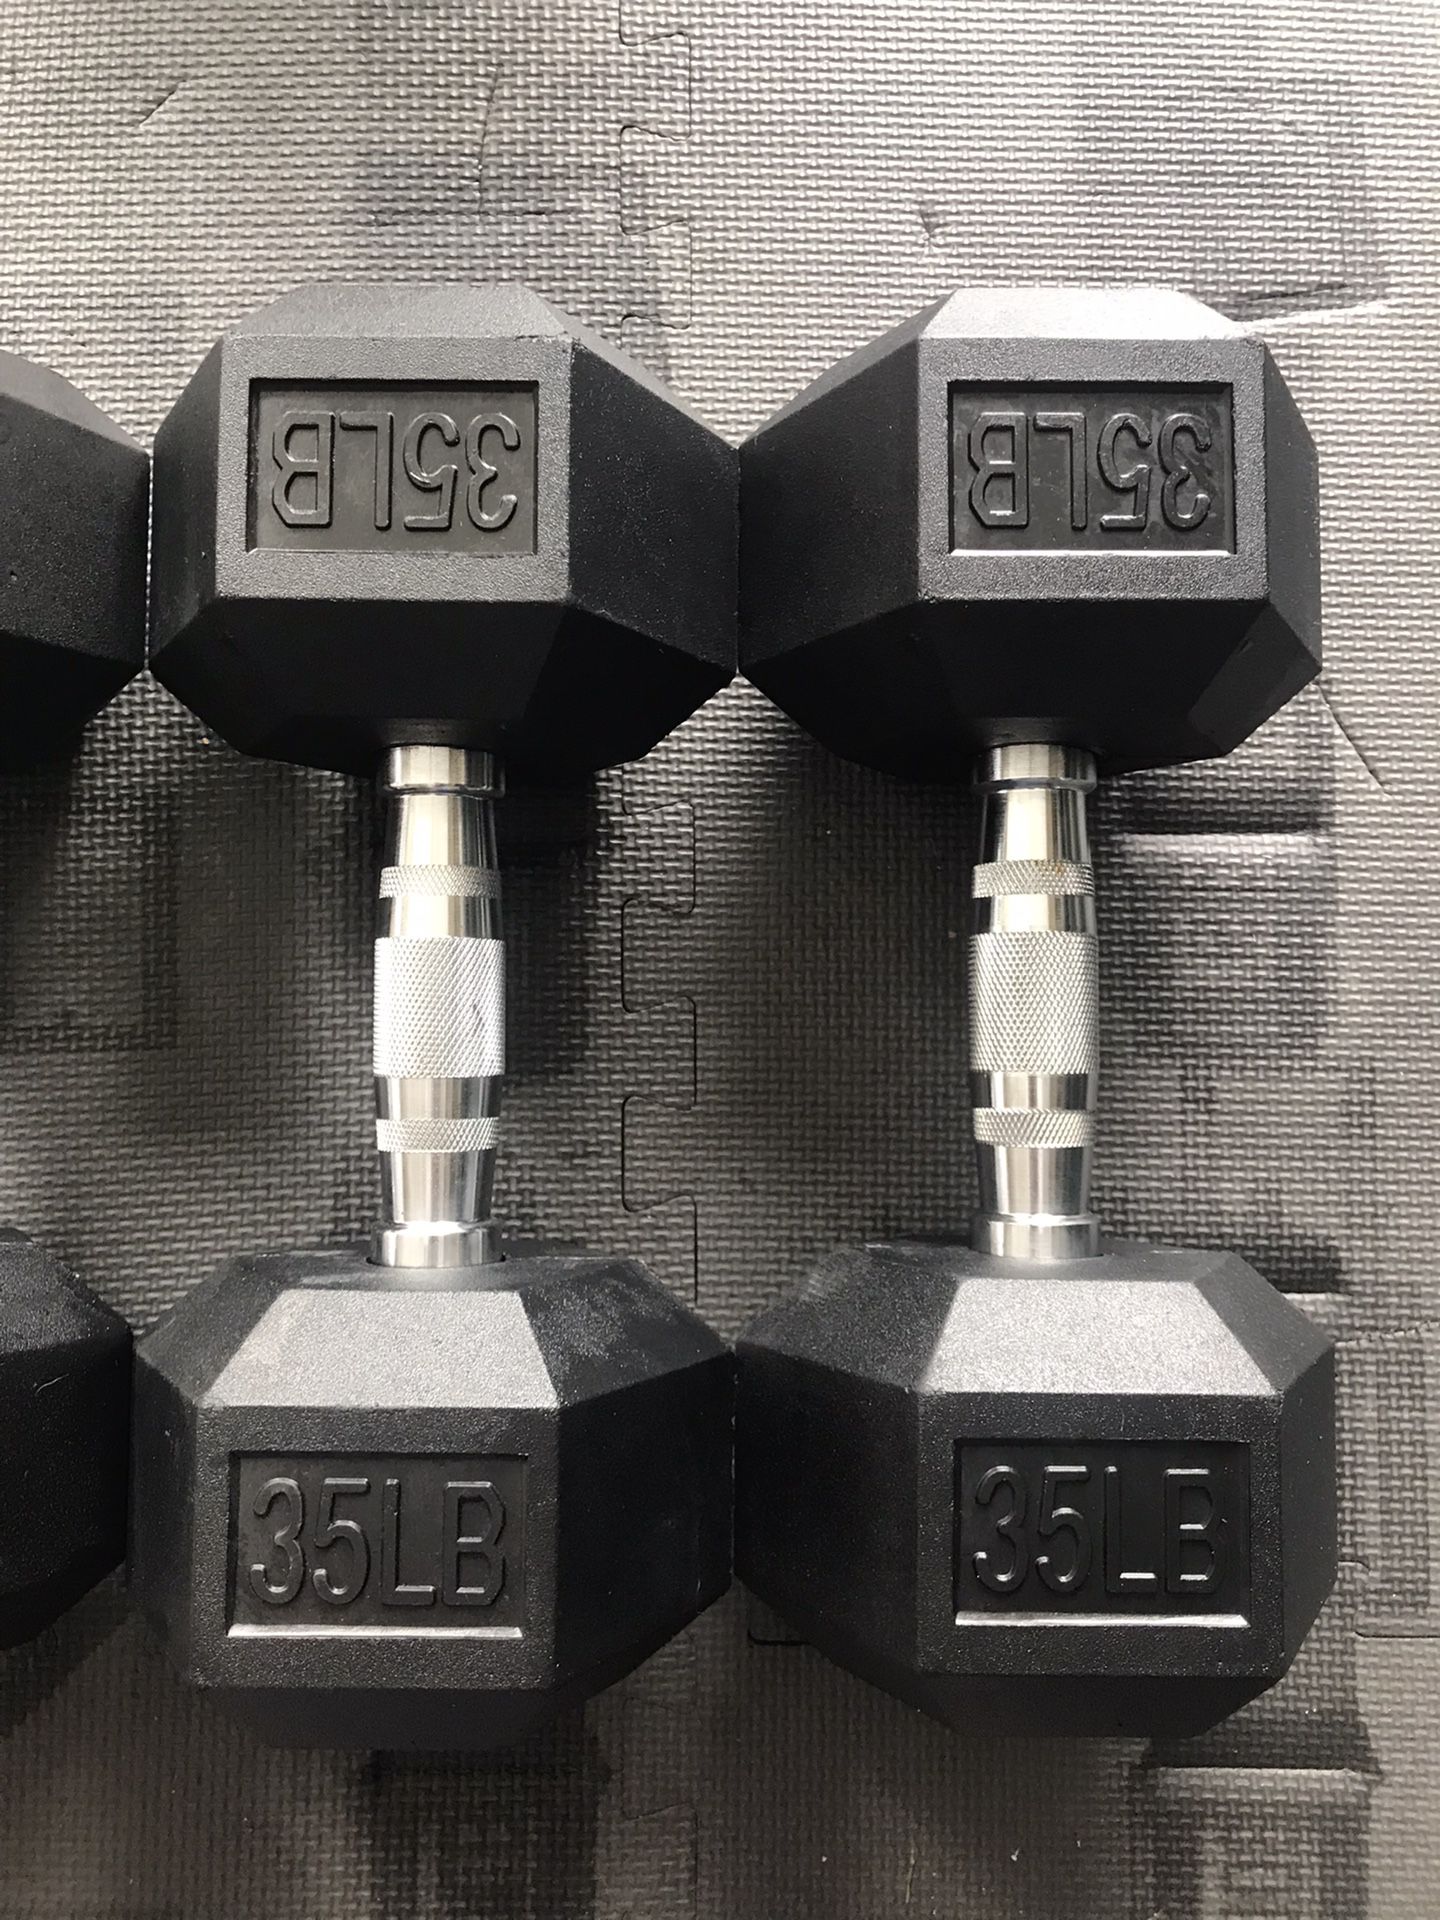 New Hex Dumbbells 💪 (2x35Lbs) for $56 Firm on Price 